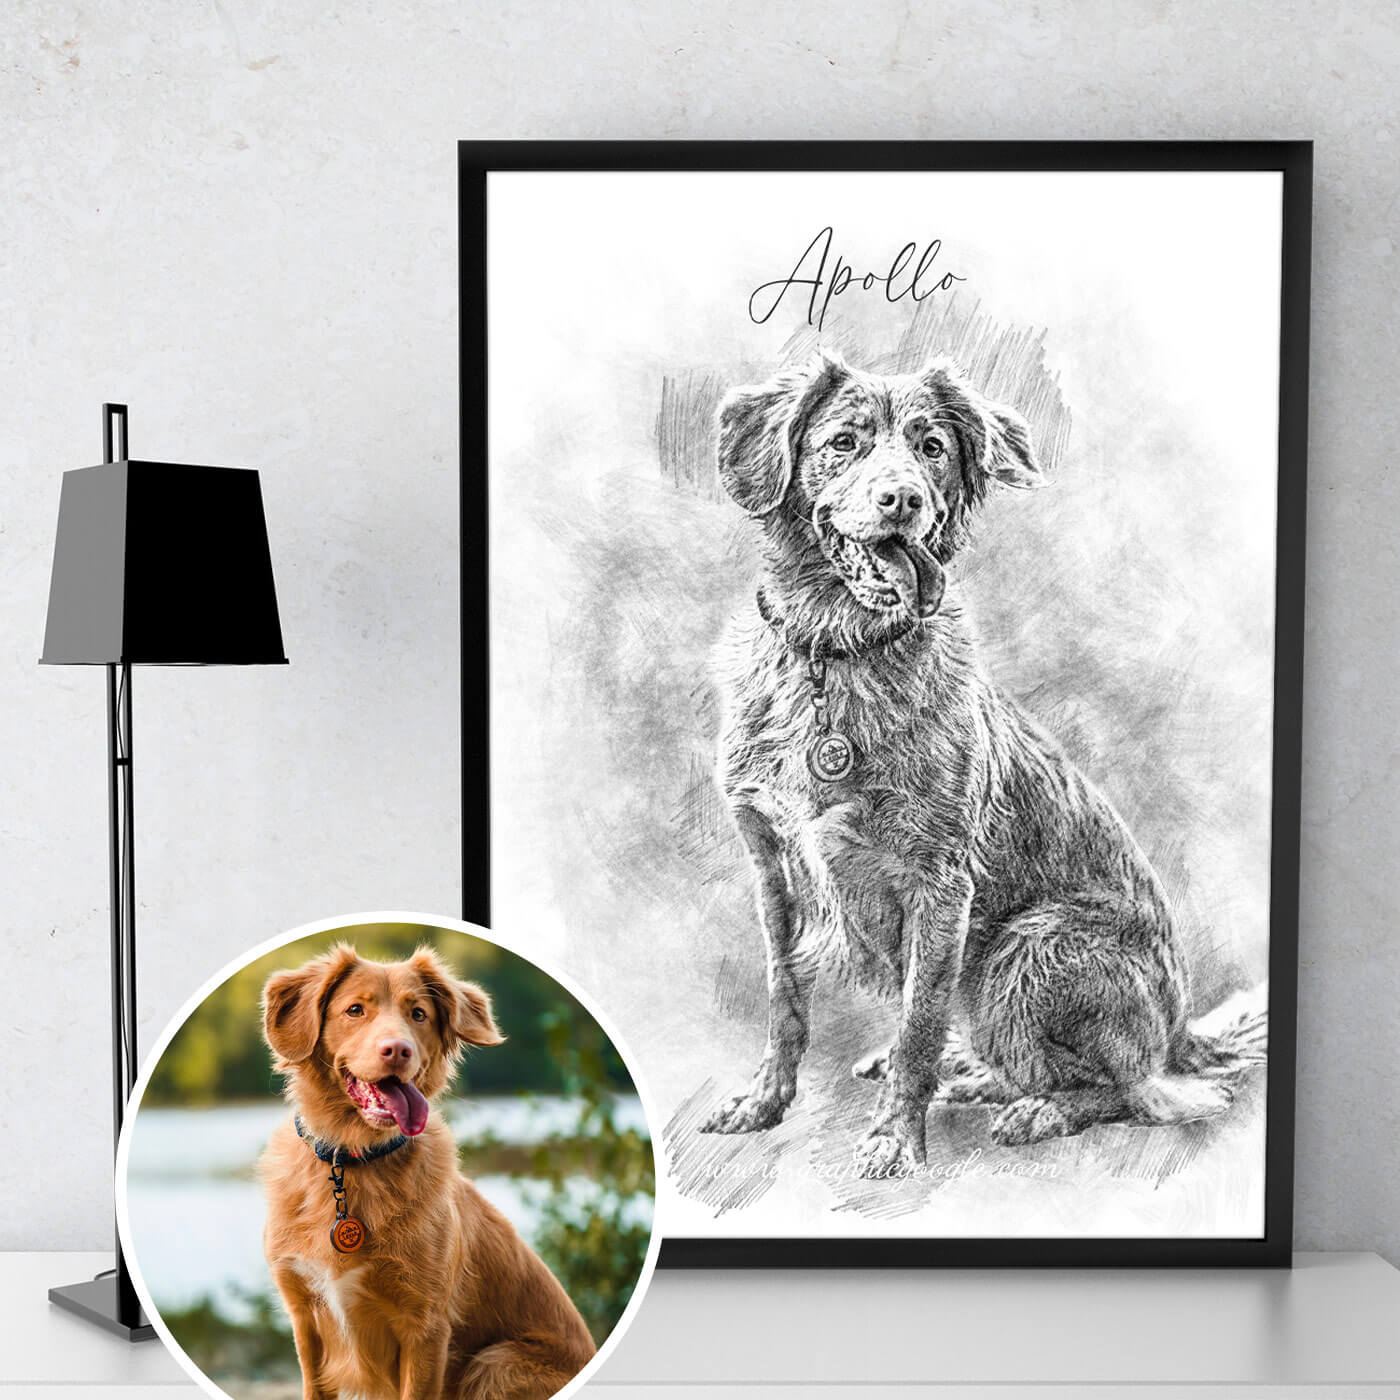 Pet pencil portraits, including dogs, cats or any pet you have